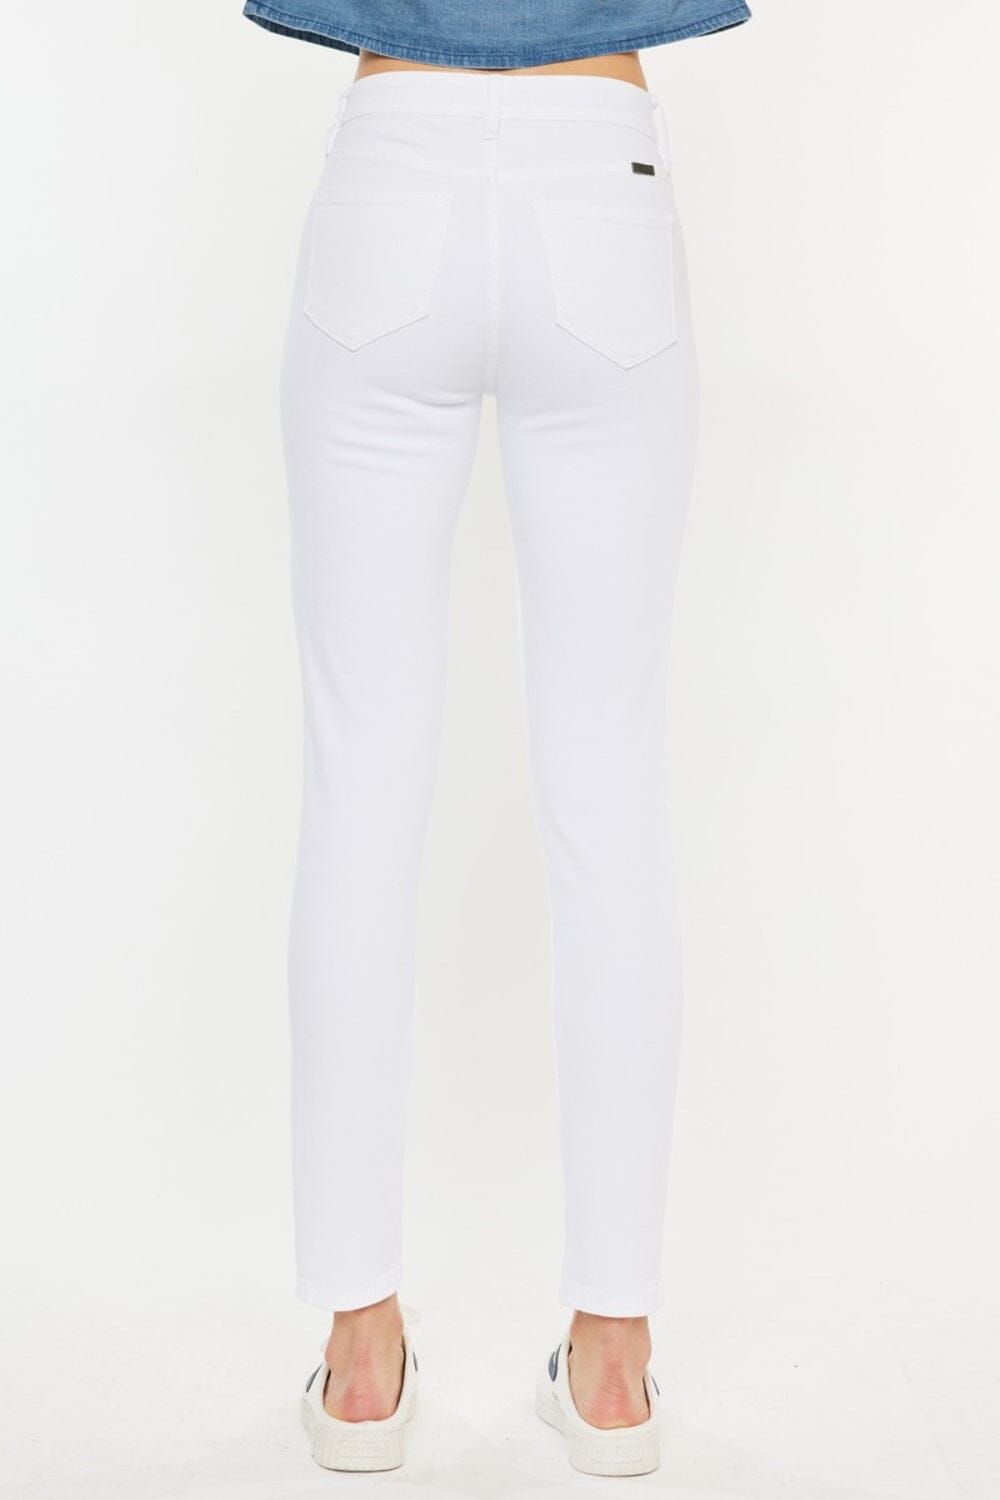 Kancan White High Rise Ankle Skinny Jeans jeans jehouze 